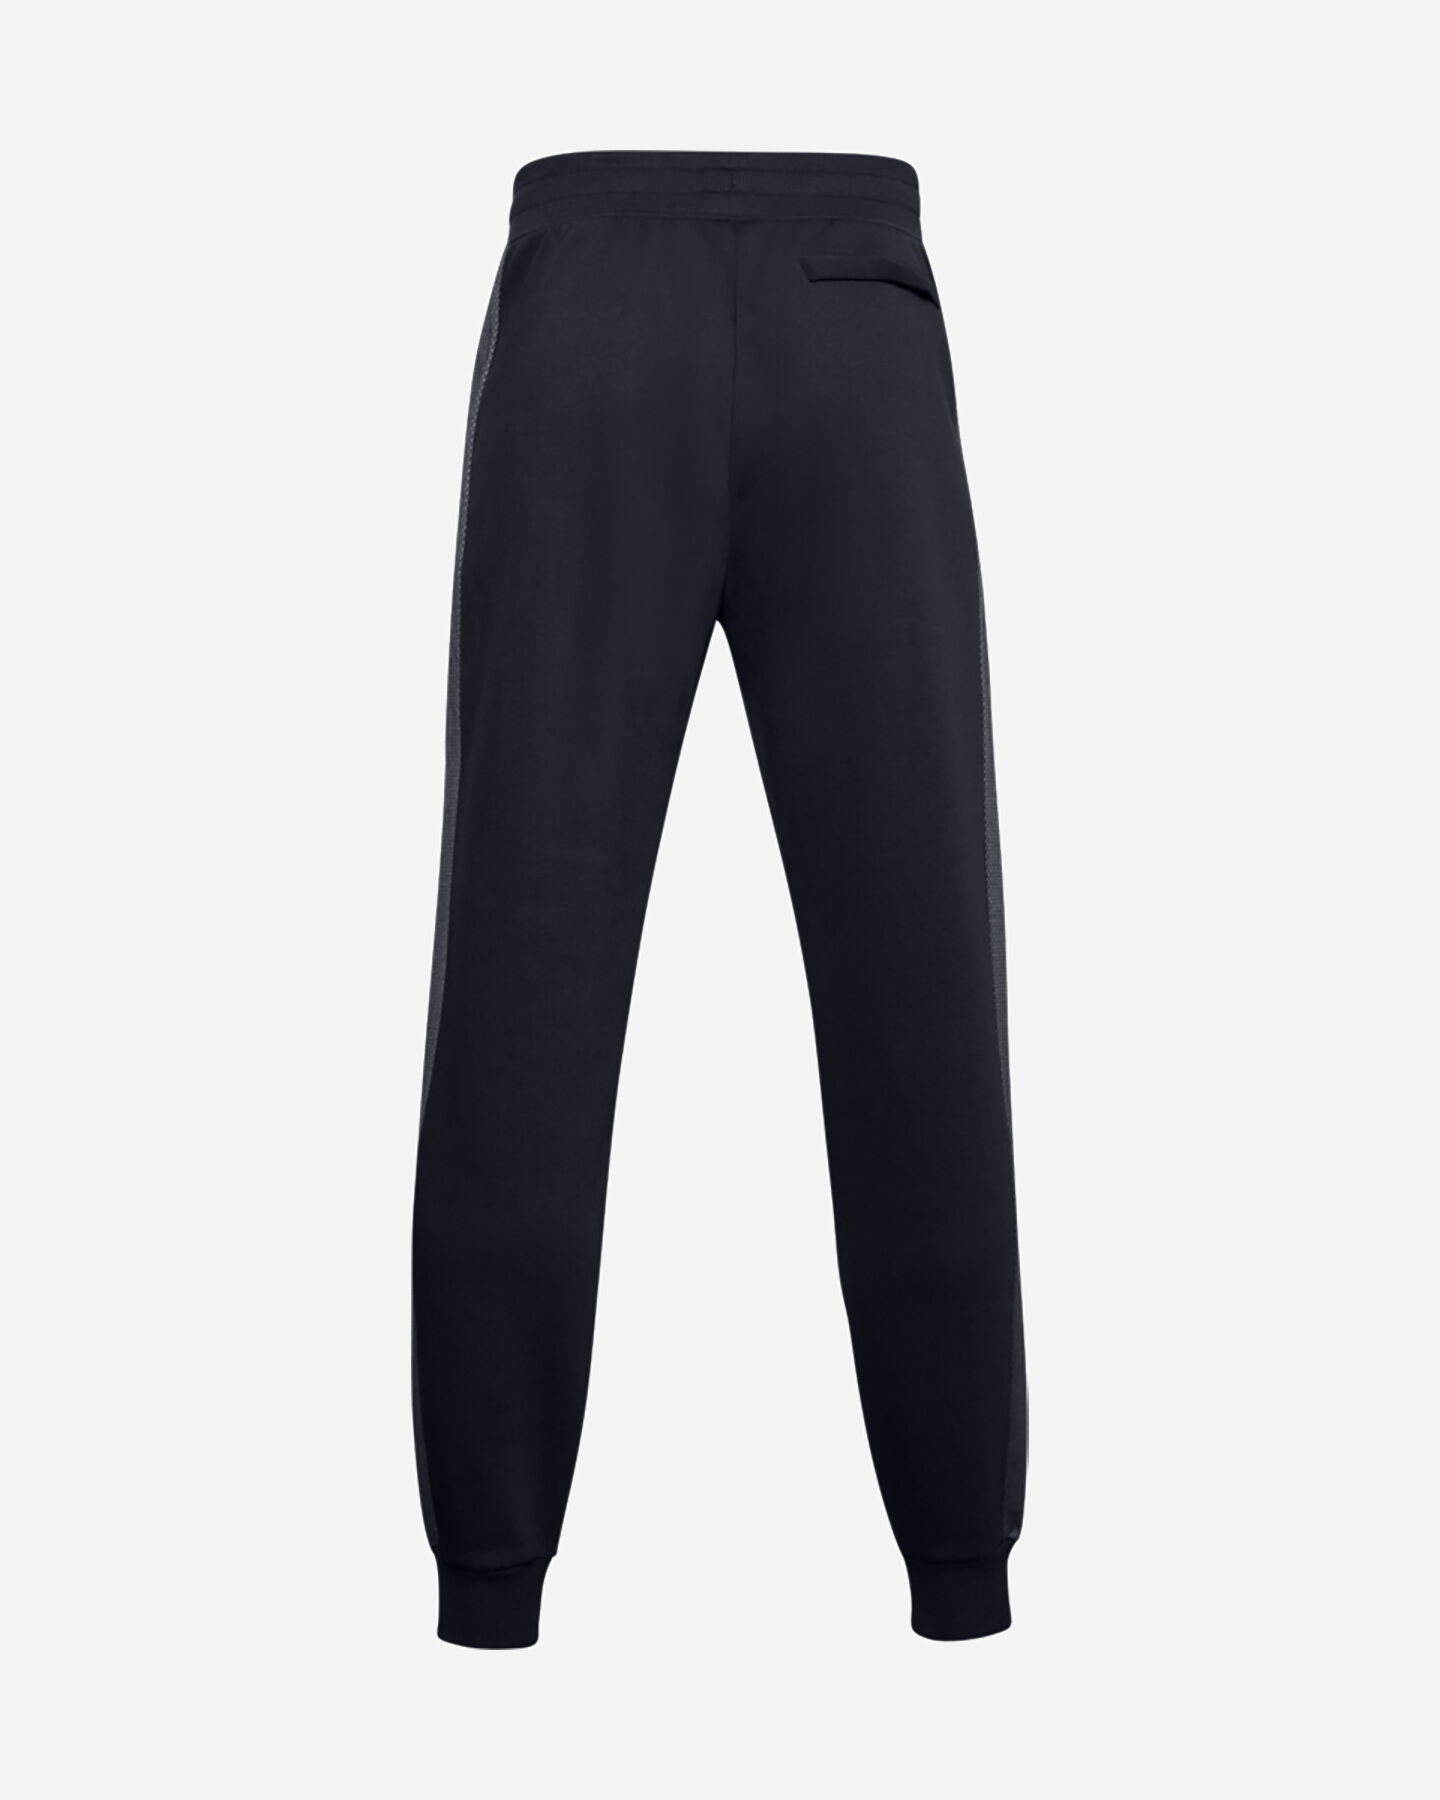  Pantalone UNDER ARMOUR RIVAL M S5229598|0001|XS scatto 1